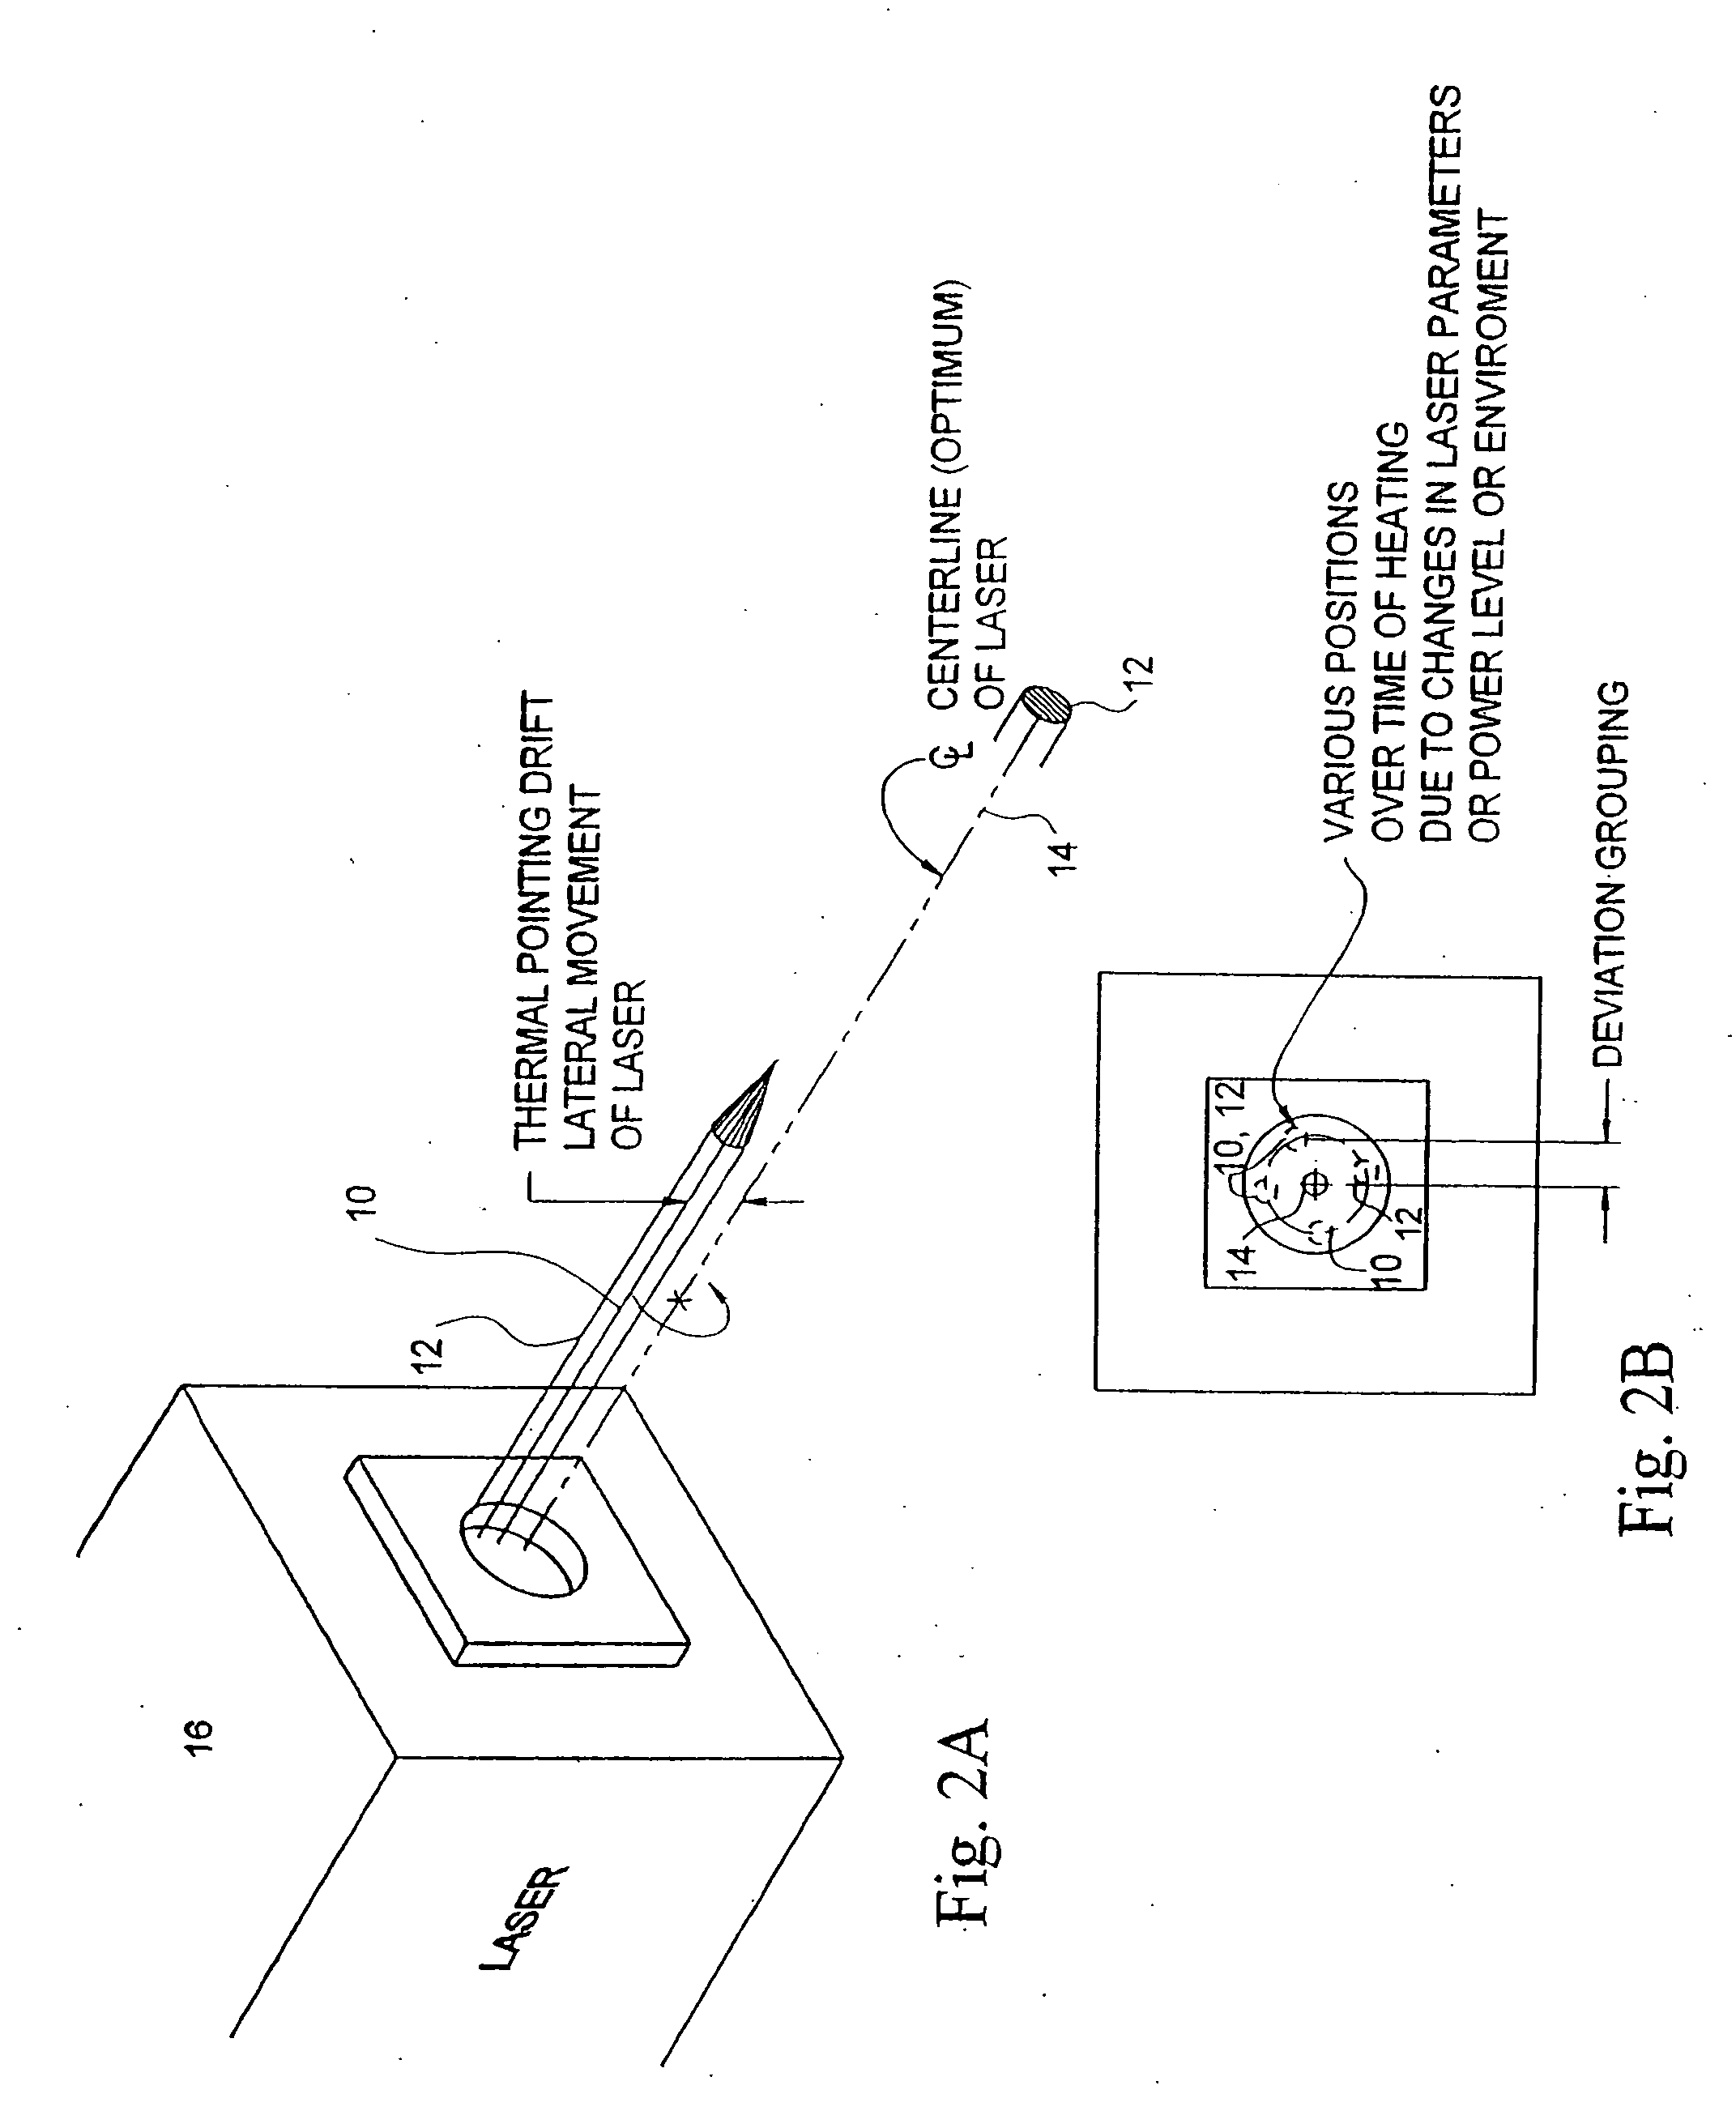 Beam shaping prior to harmonic generation for increased stability of laser beam shaping post harmonic generation with integrated automatic displacement and thermal beam drift compensation